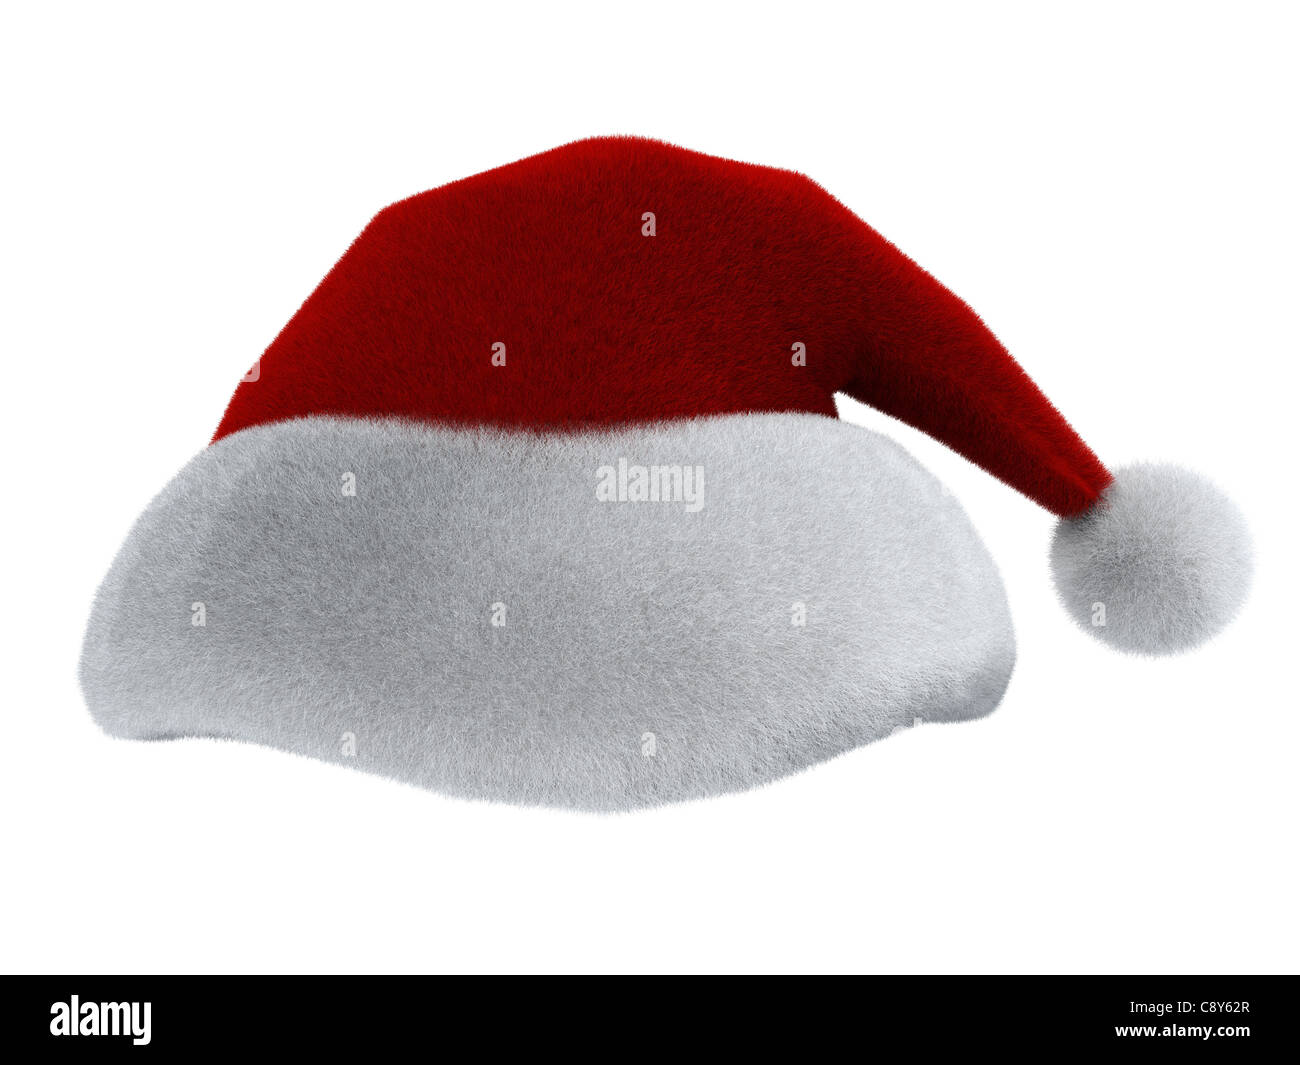 Santa Claus's red hat Stock Photo